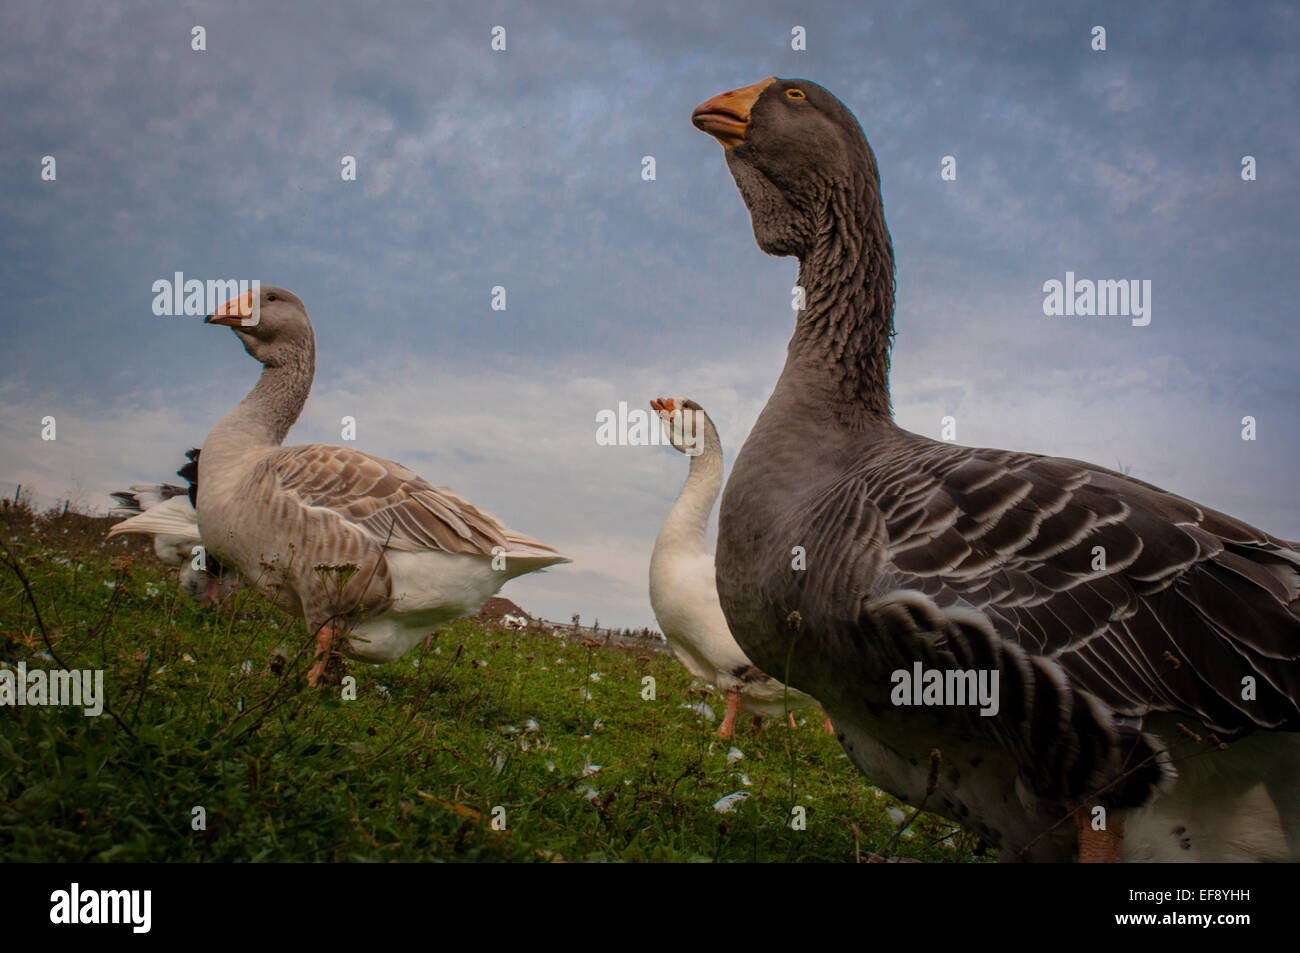 Small group of wild geese walking on grass Stock Photo